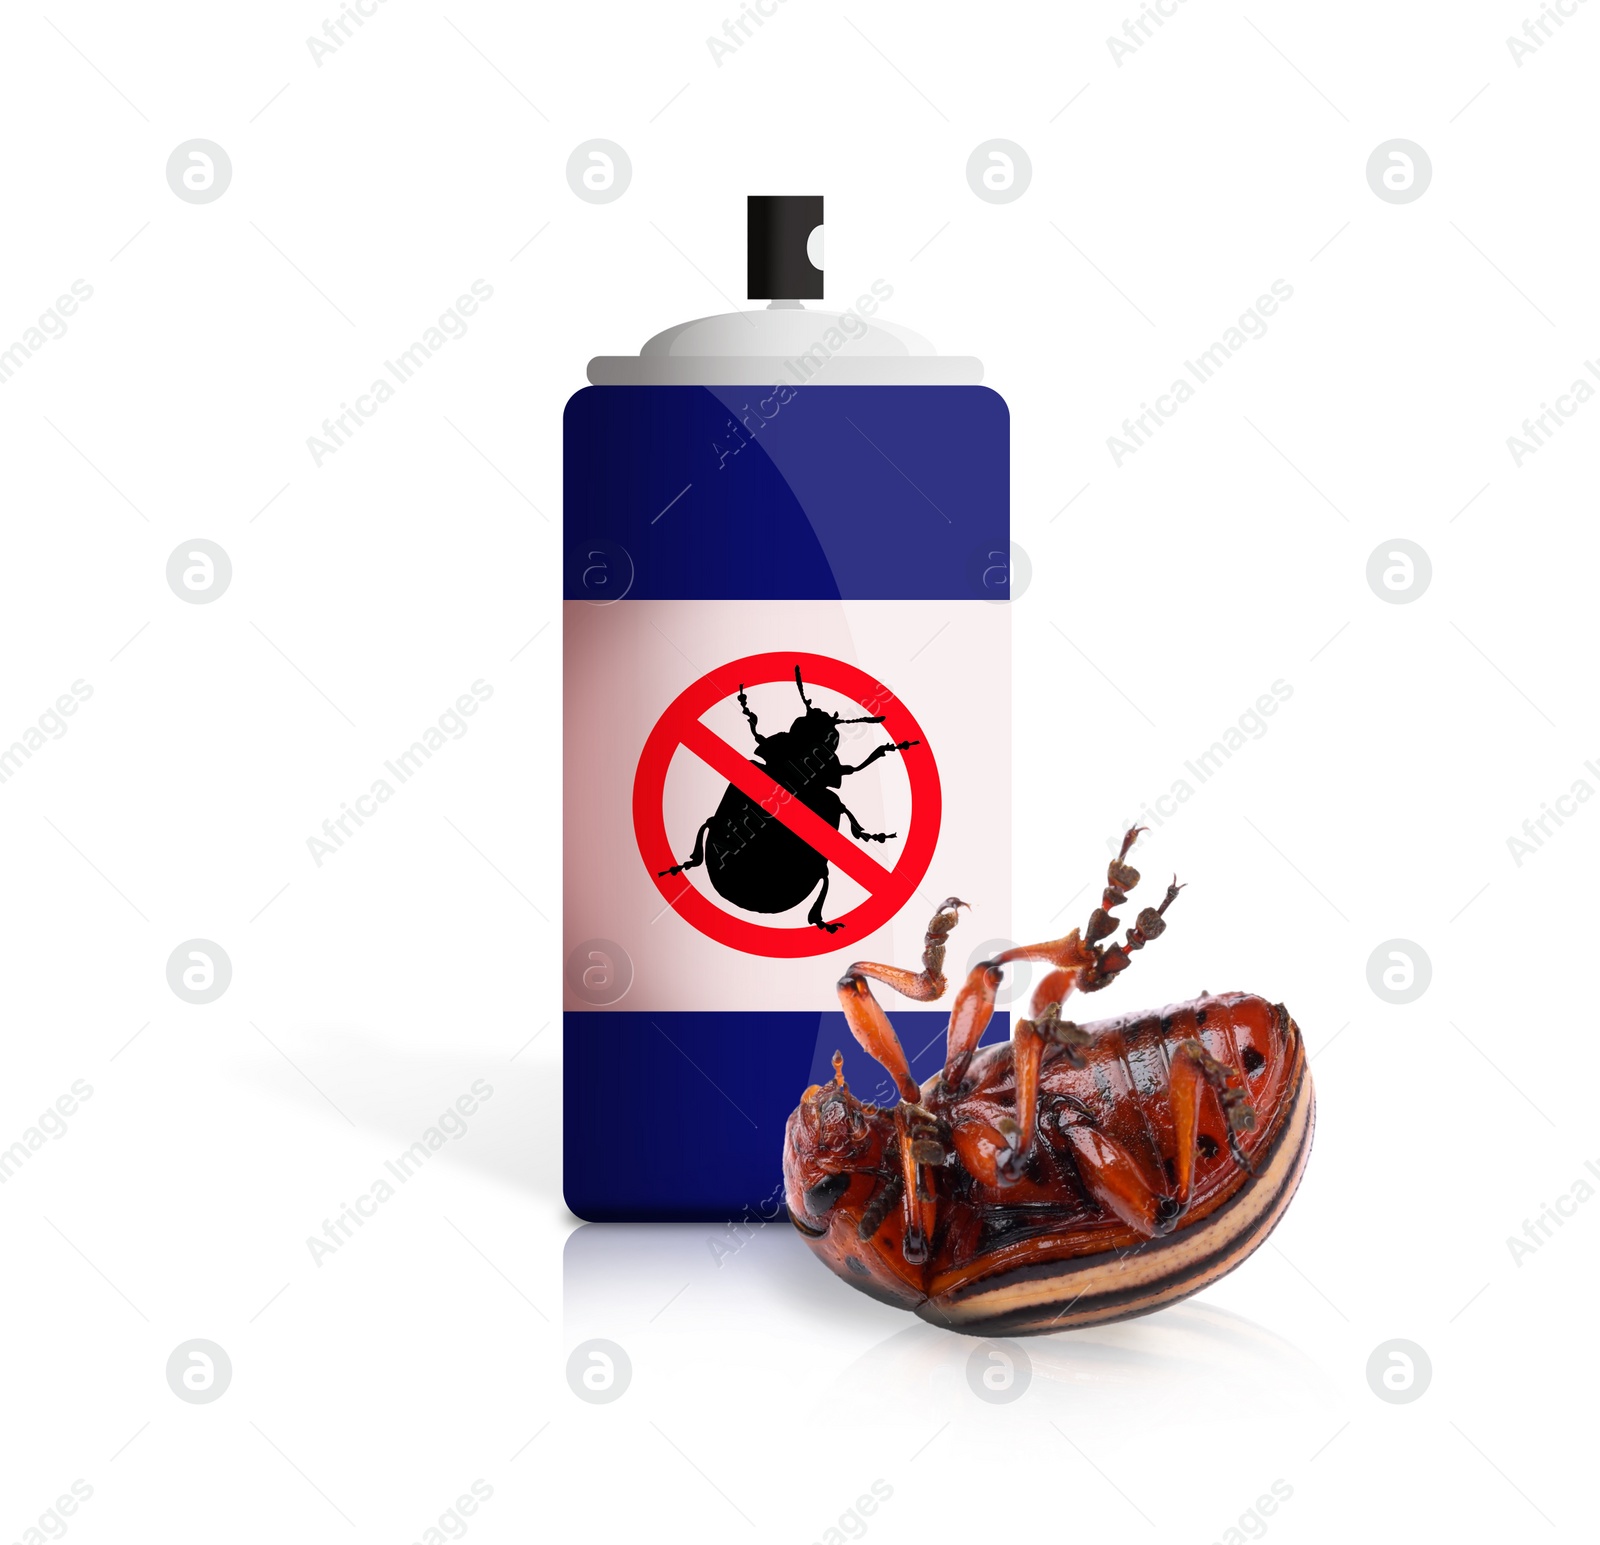 Image of Insecticide and dead Colorado potato beetle on white background